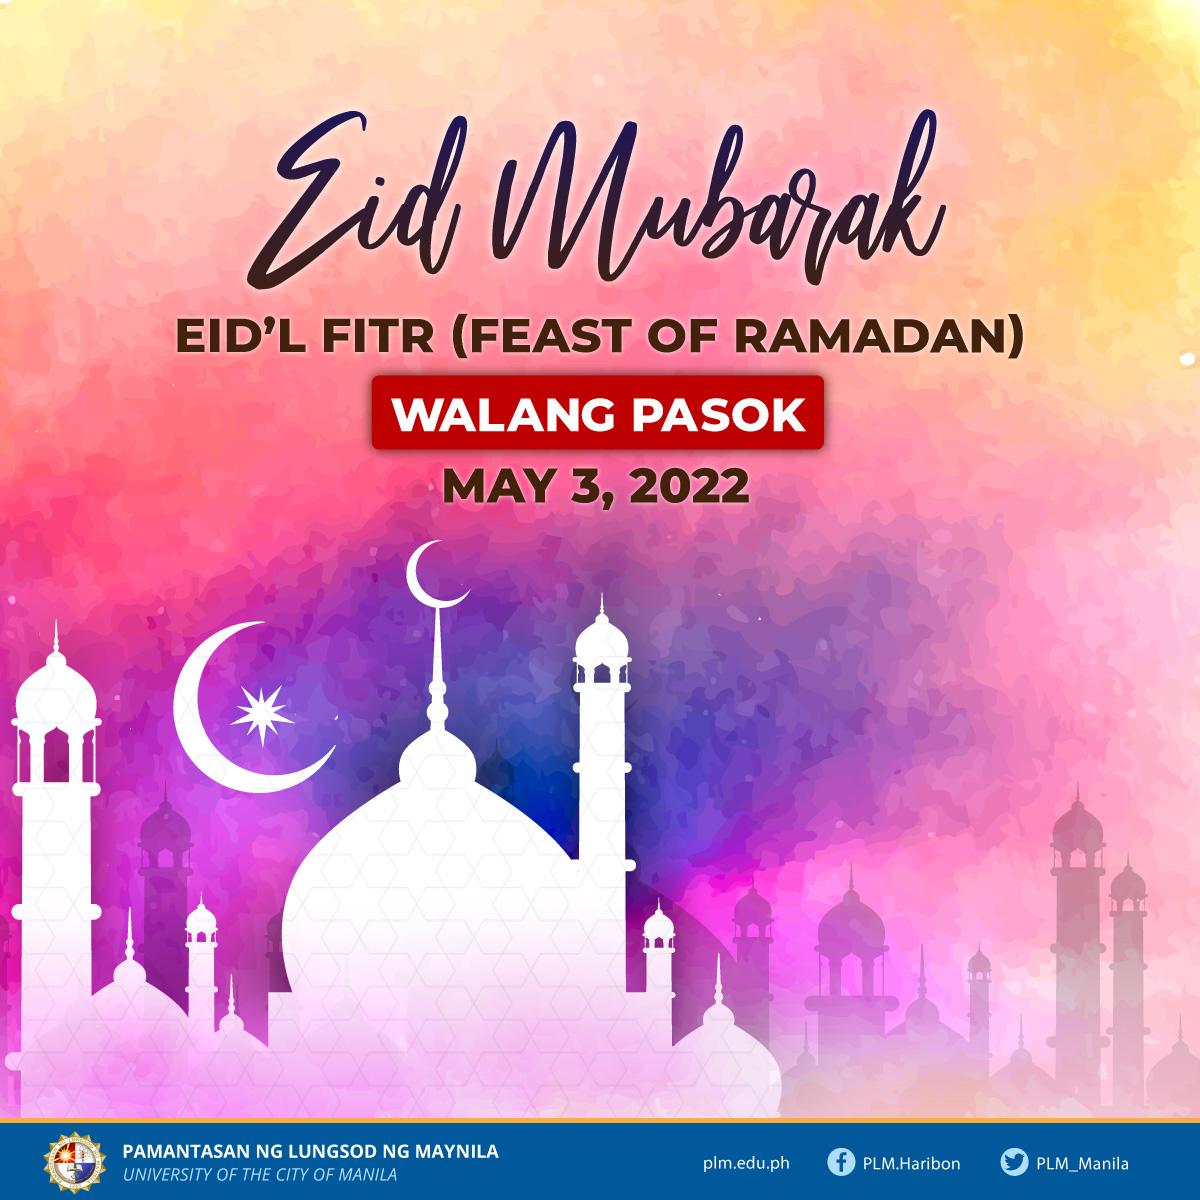 Classes, work suspended on Eidl Fitr, May 3, 2022 